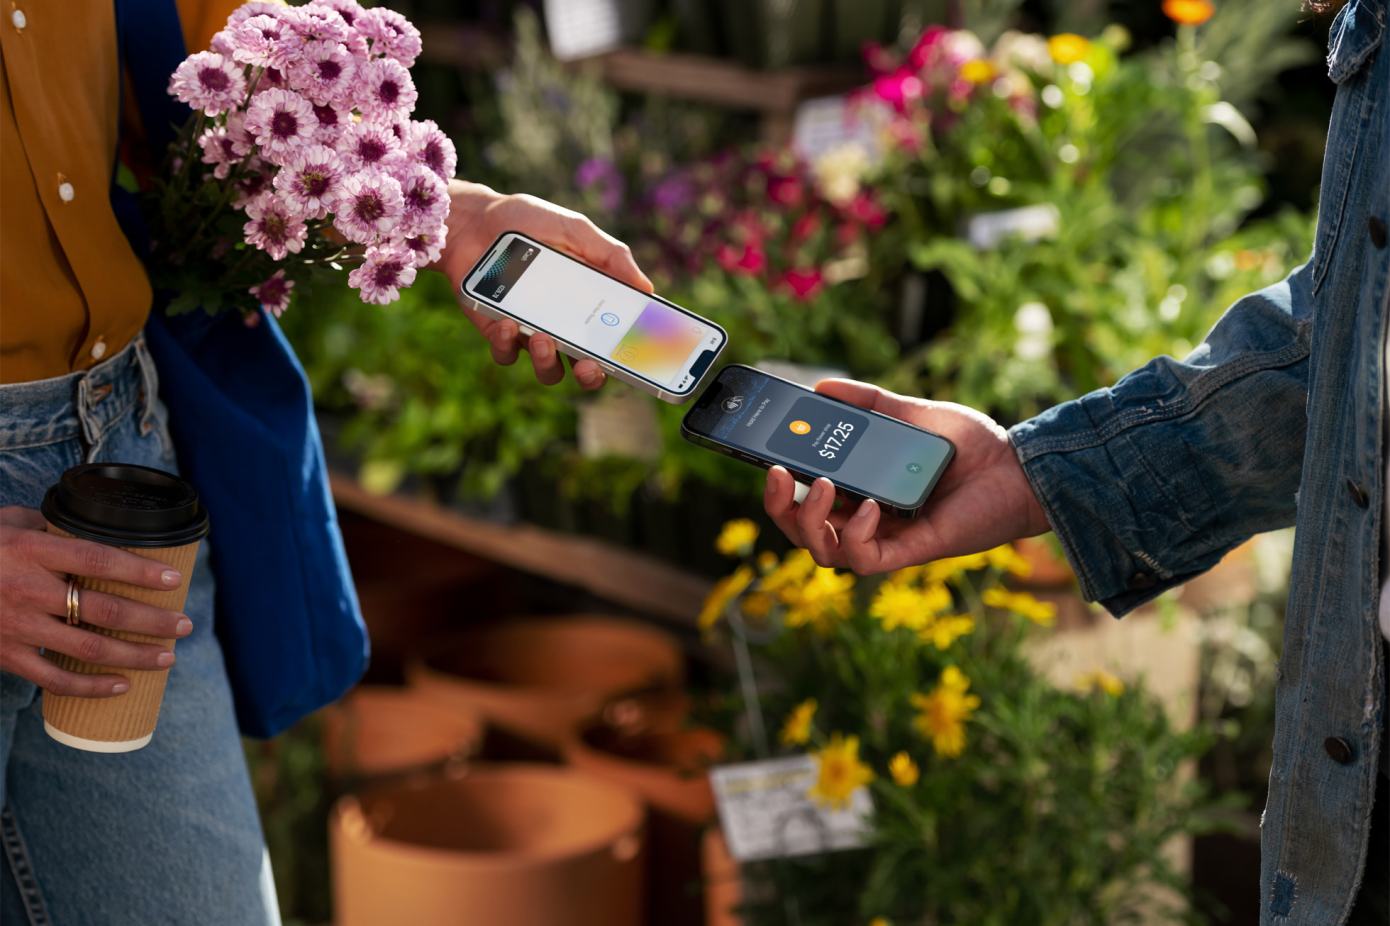 Apple announces ‘Tap to Pay’ feature to allow contactless payments